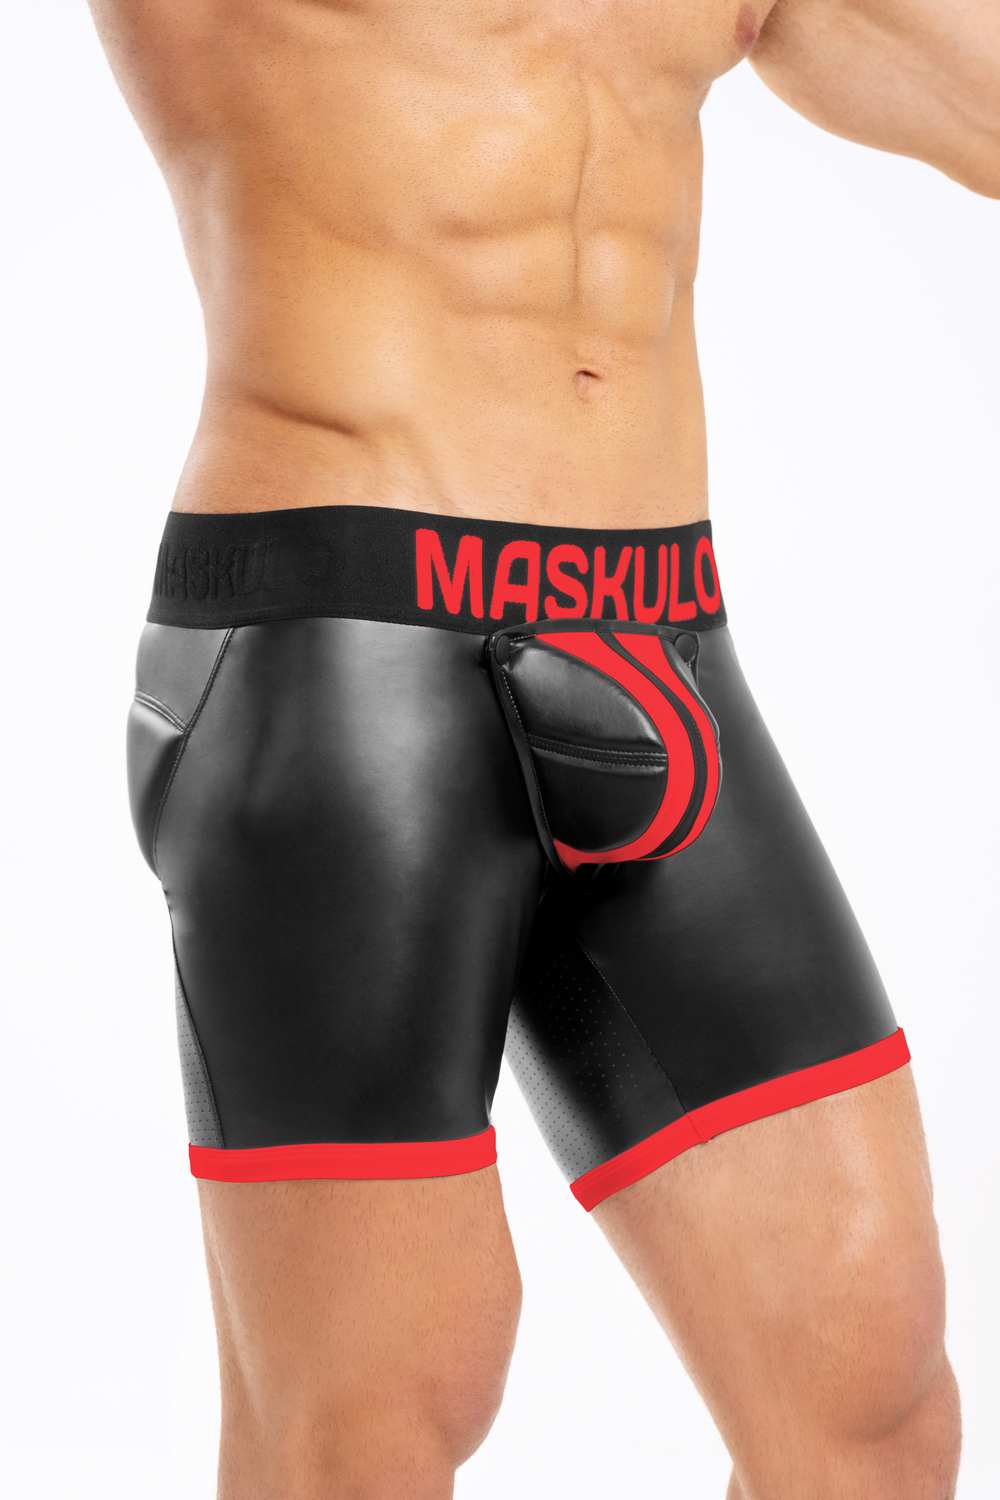 Basic Shorts with Pads. Zippered rear. Black+Red